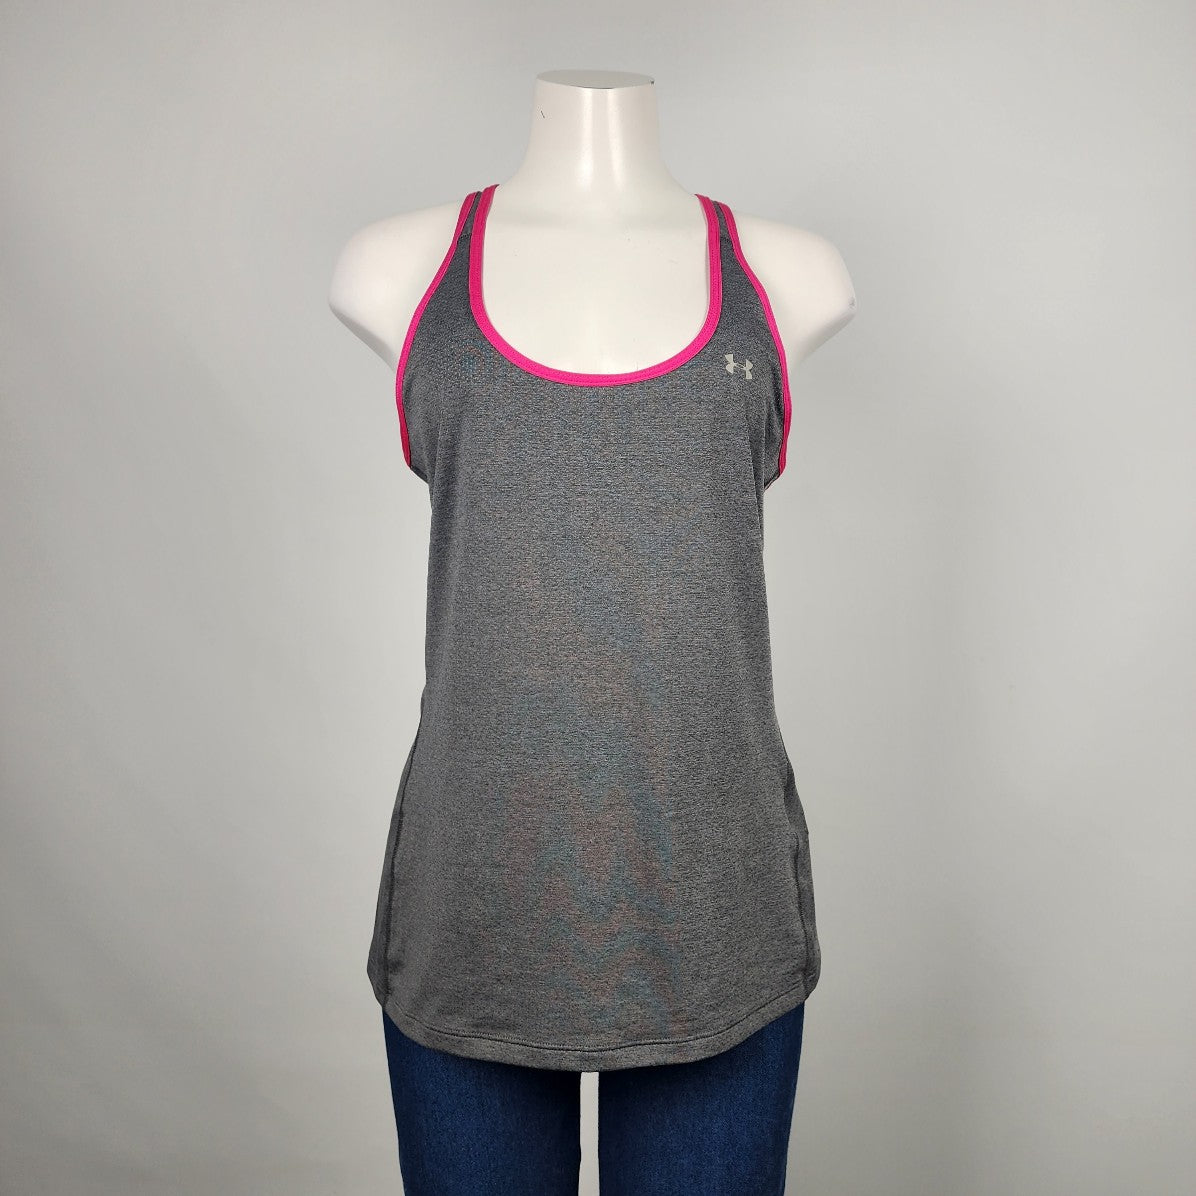 Under Armour Grey & Pink Activewear Top Size L